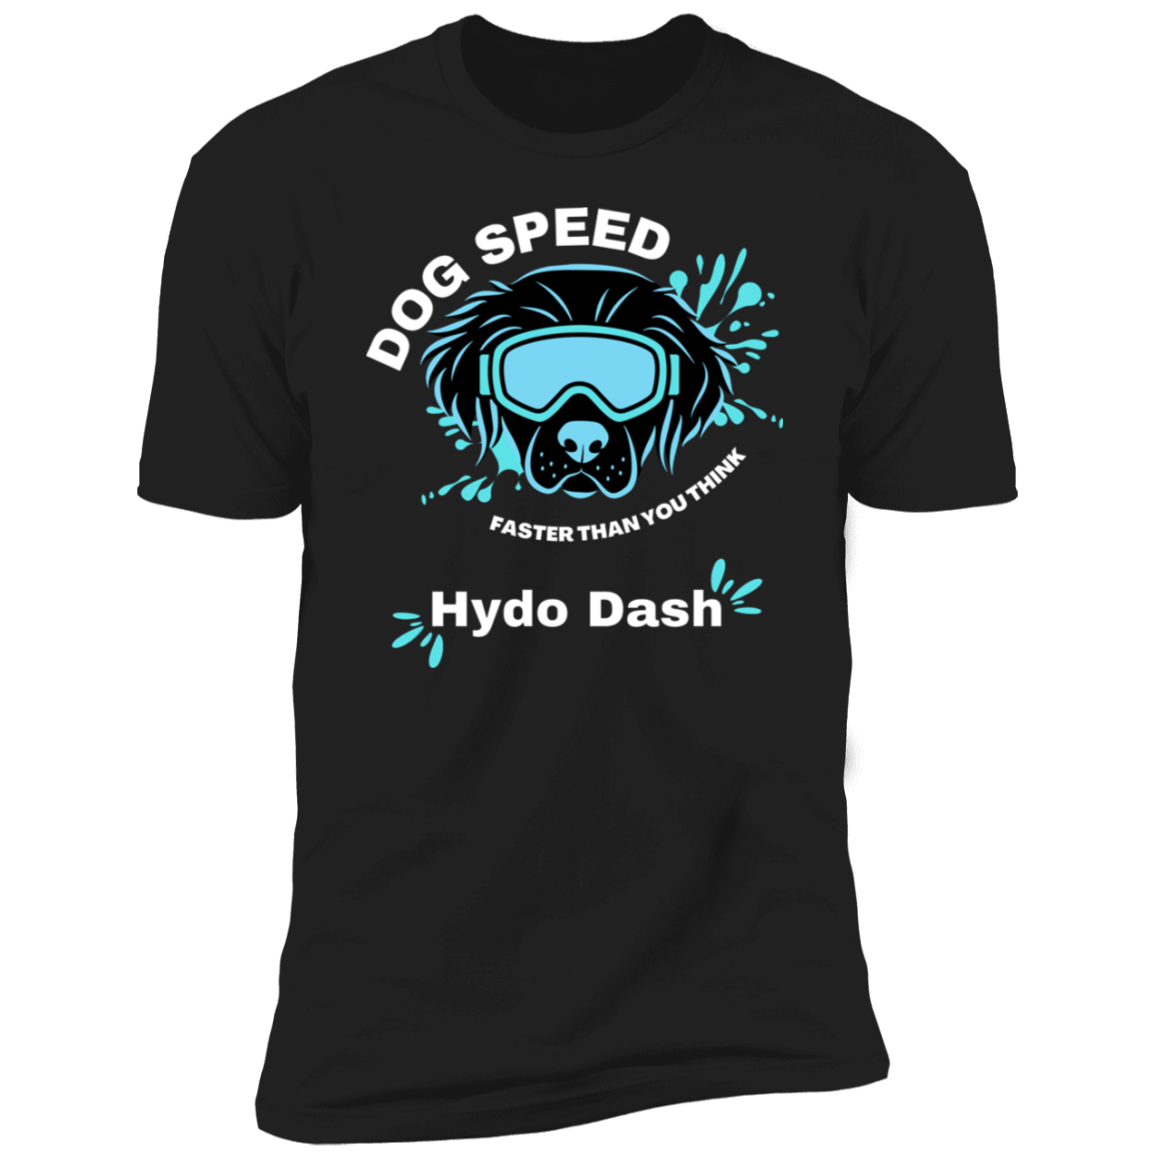 Dog Speed Faster Than You Think Hydro Dash T-shirt, Hydro Dash shirt dog shirt for humans, in black